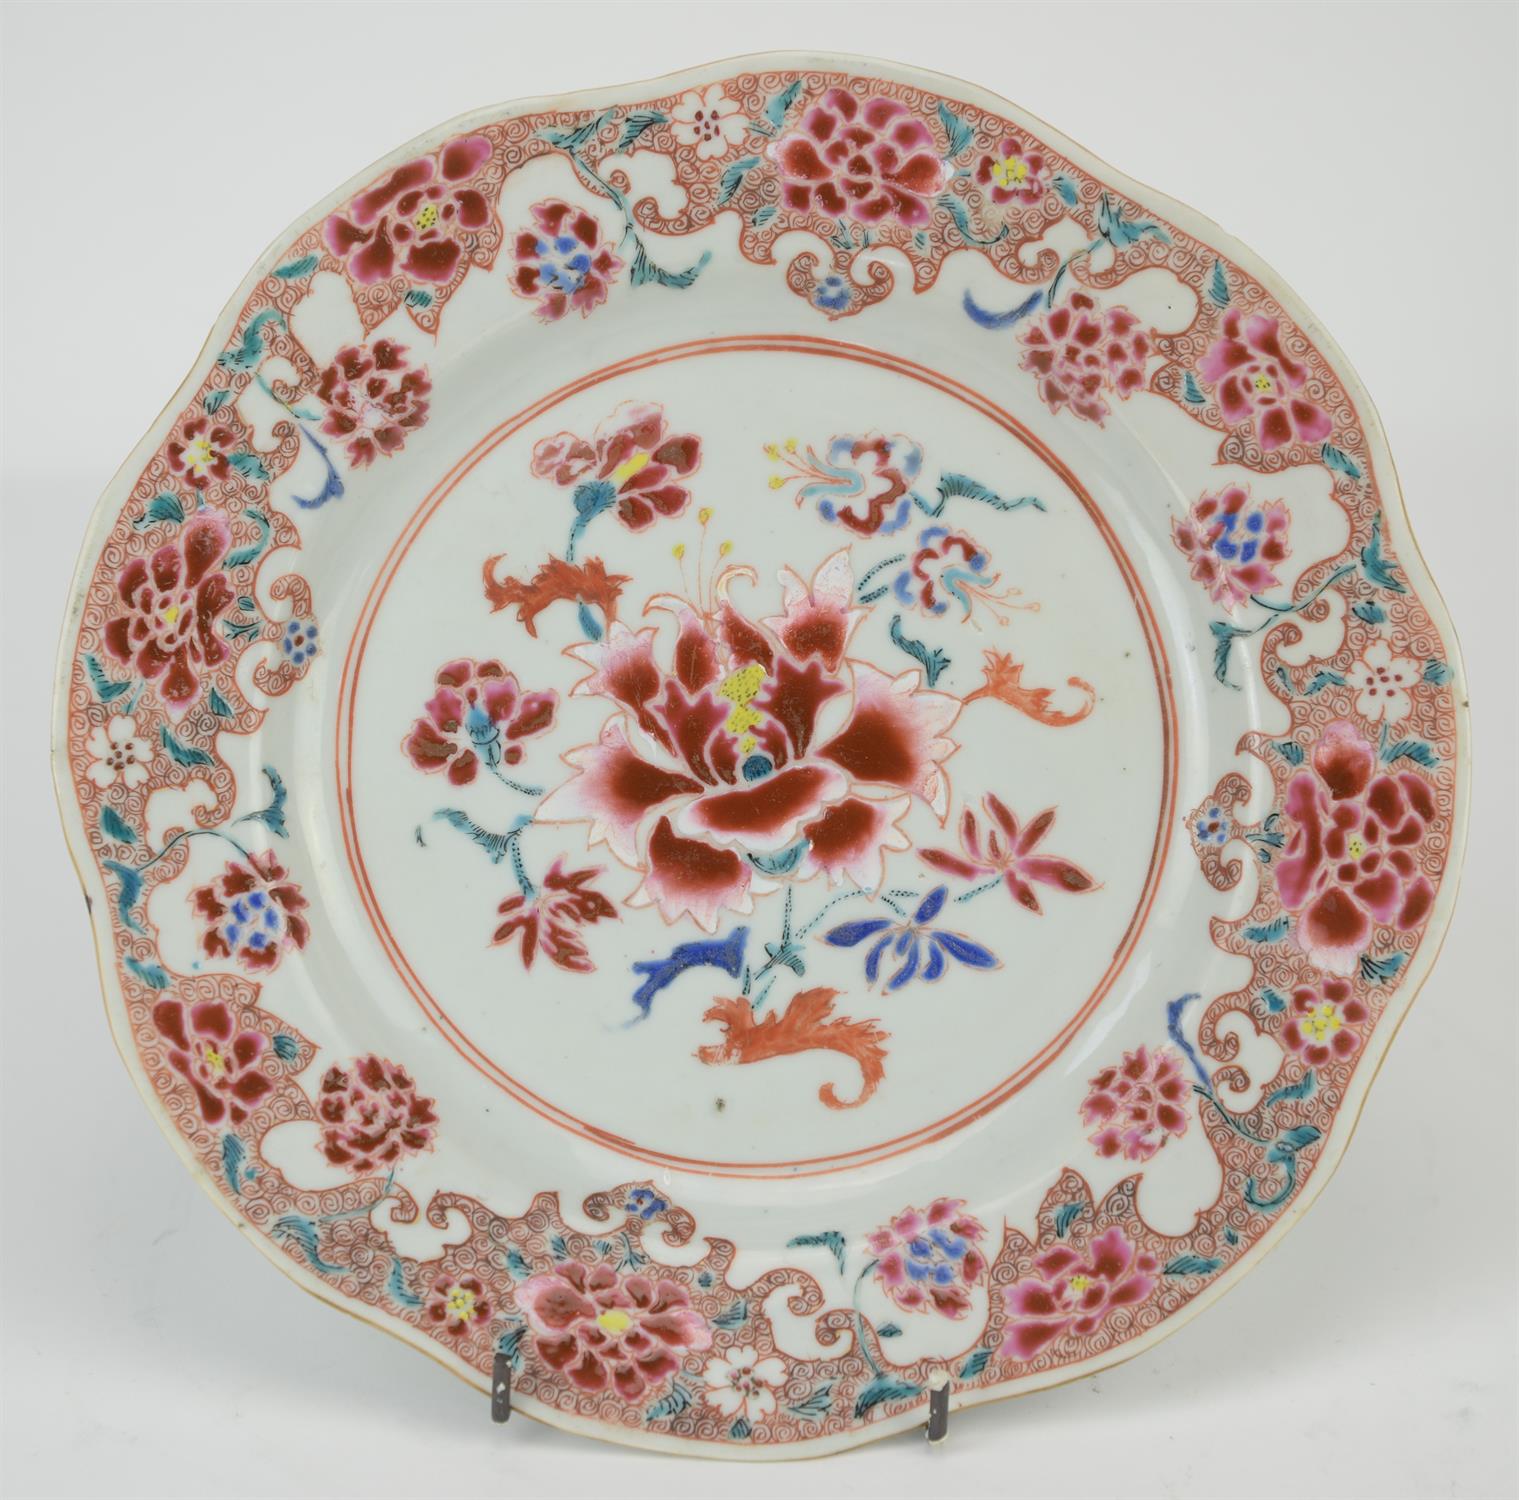 Eight famille rose dishes; each one decorated with floral designs and about 22.5 cm diameter - Image 11 of 14